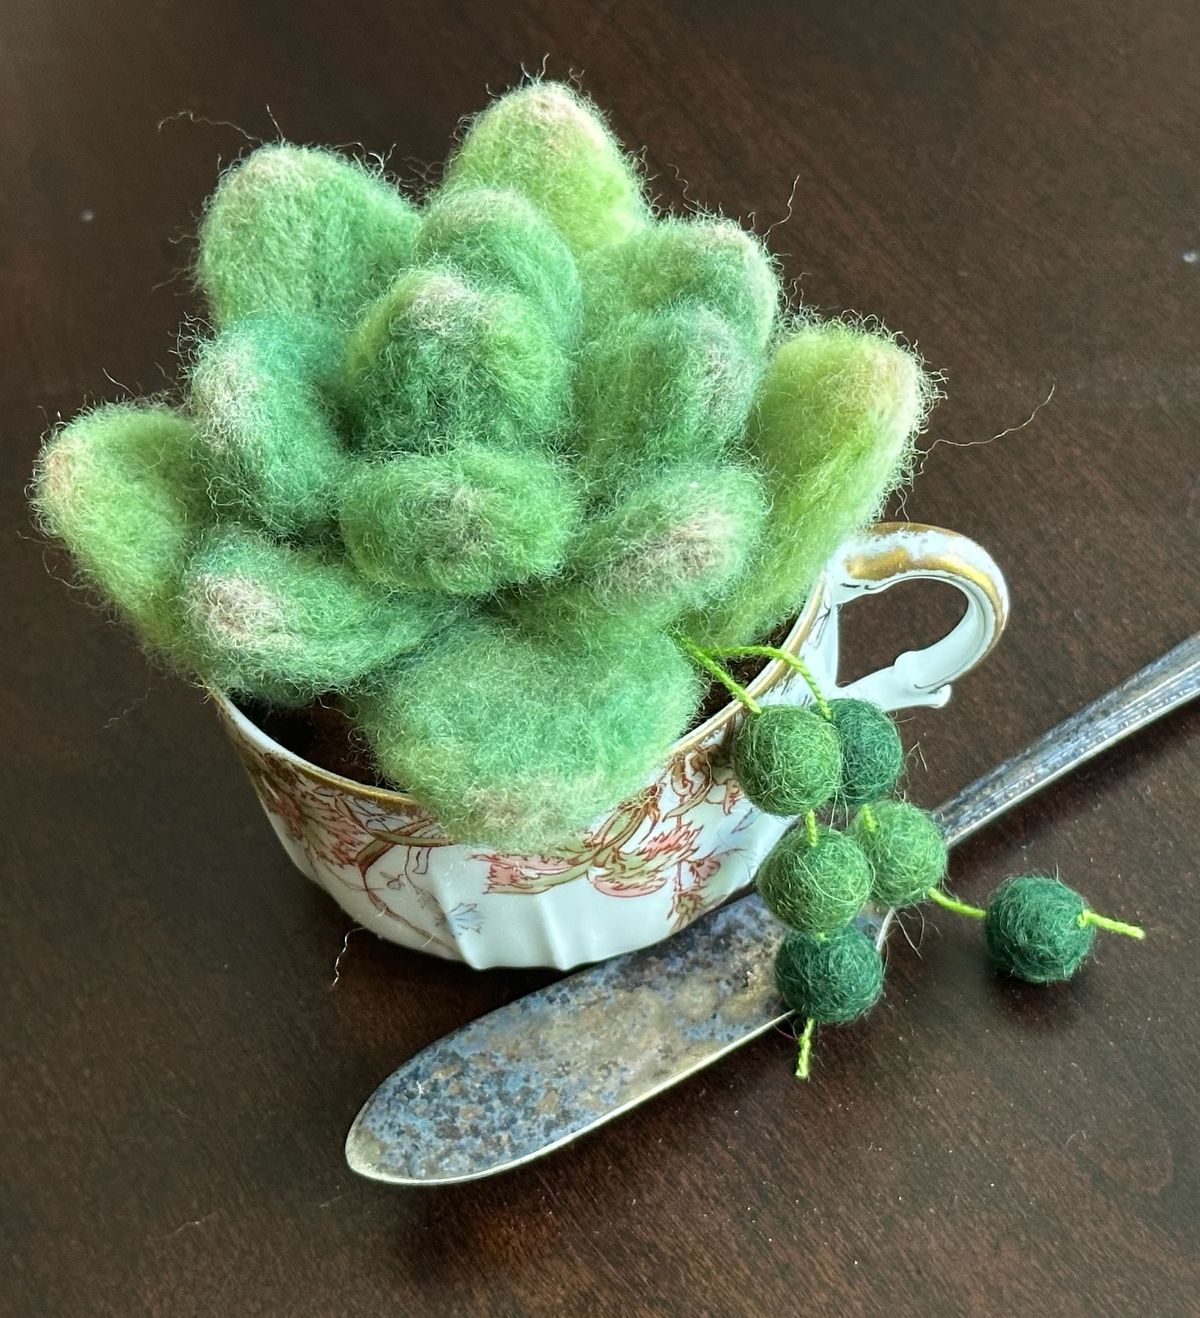 Needle Felted Succulents With Helen Weddle